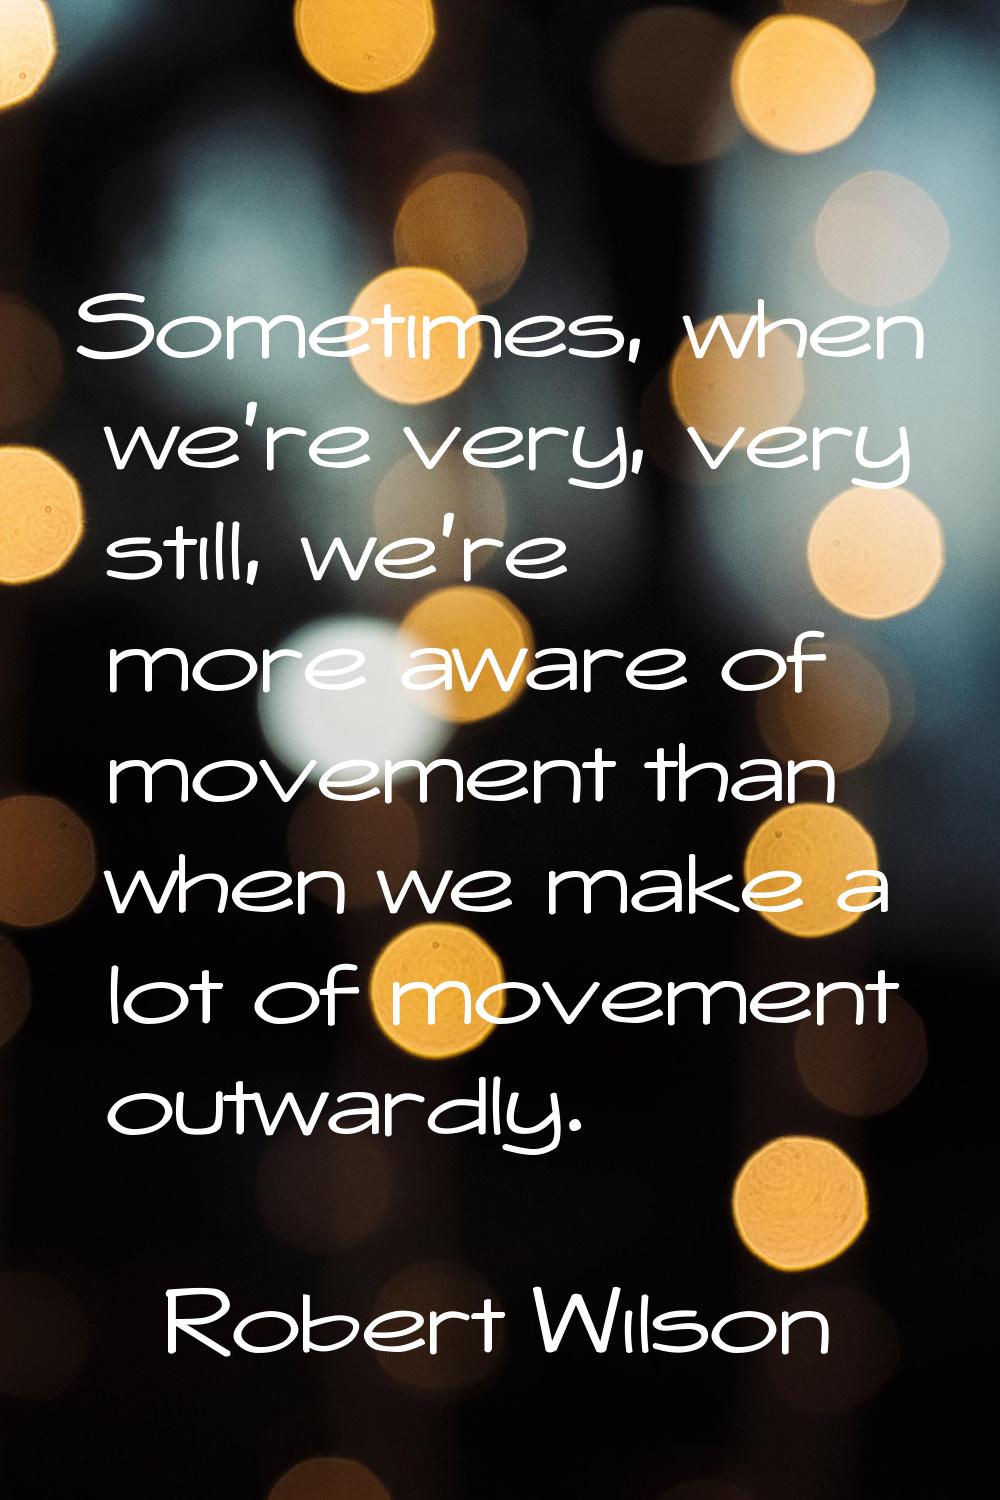 Sometimes, when we're very, very still, we're more aware of movement than when we make a lot of mov